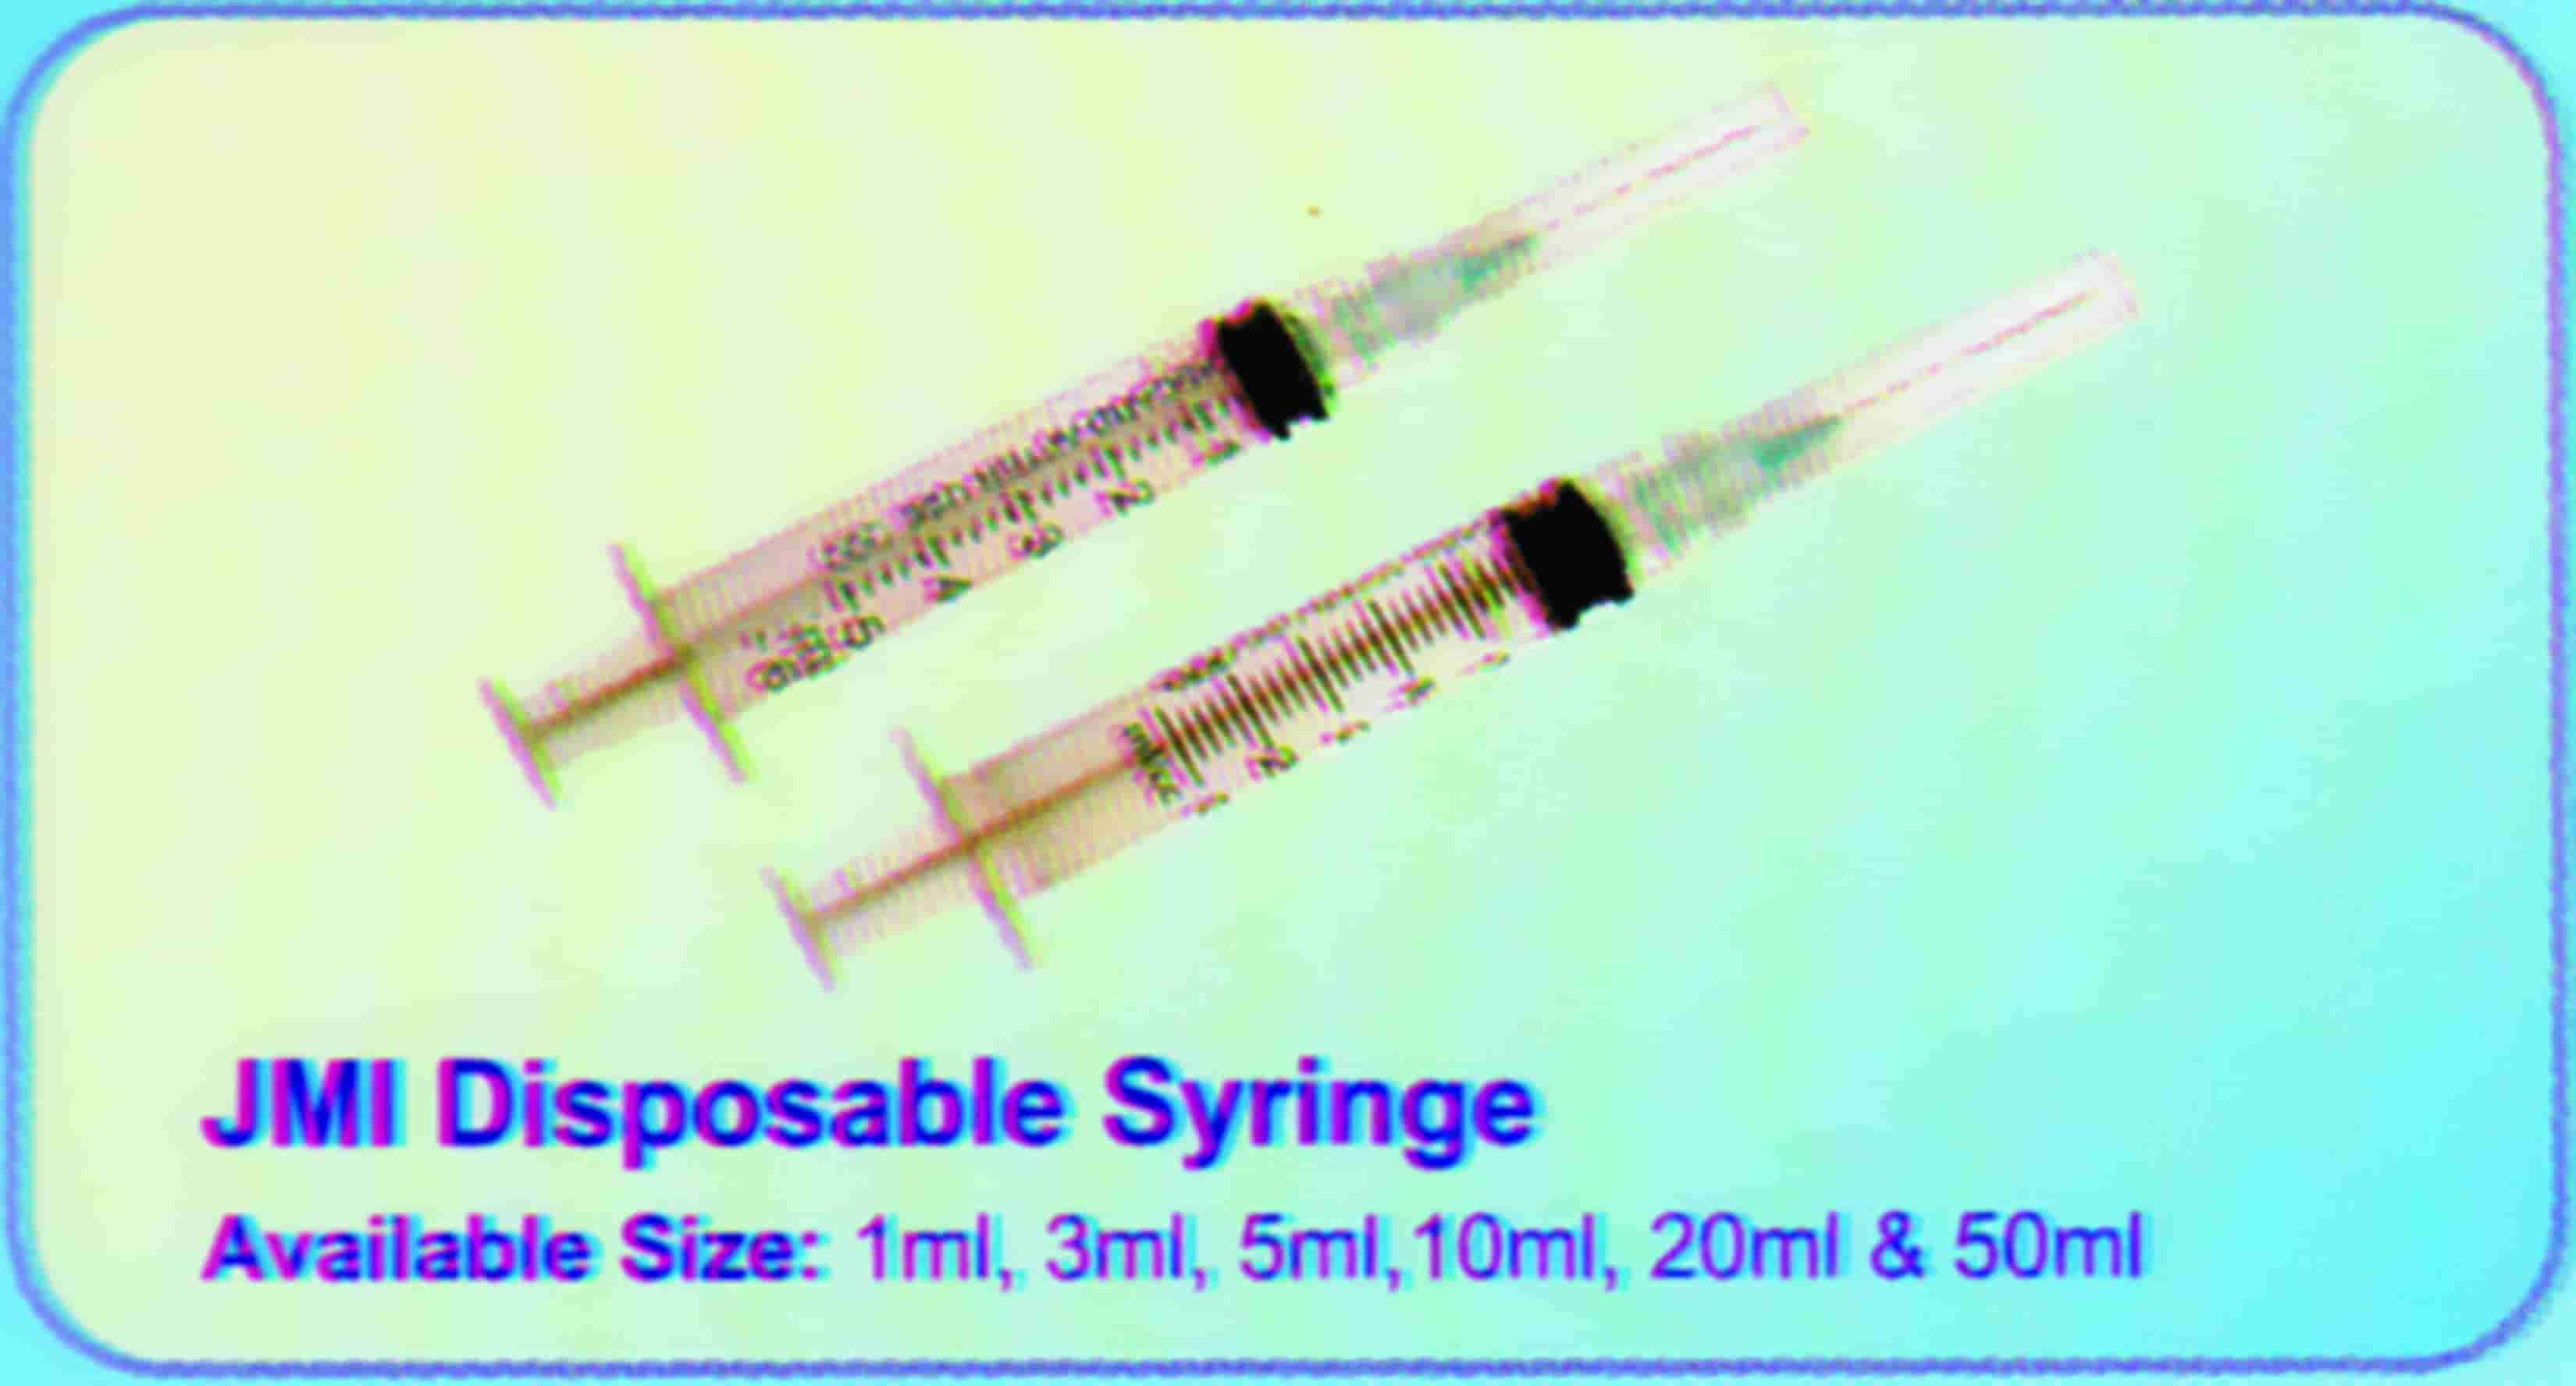 USE OF SYRINGES FOR INJECTIONS: BENEFIT, RISKS AND AWARENESS – A GLOBAL CONCERN GLOBAL SCENARIO